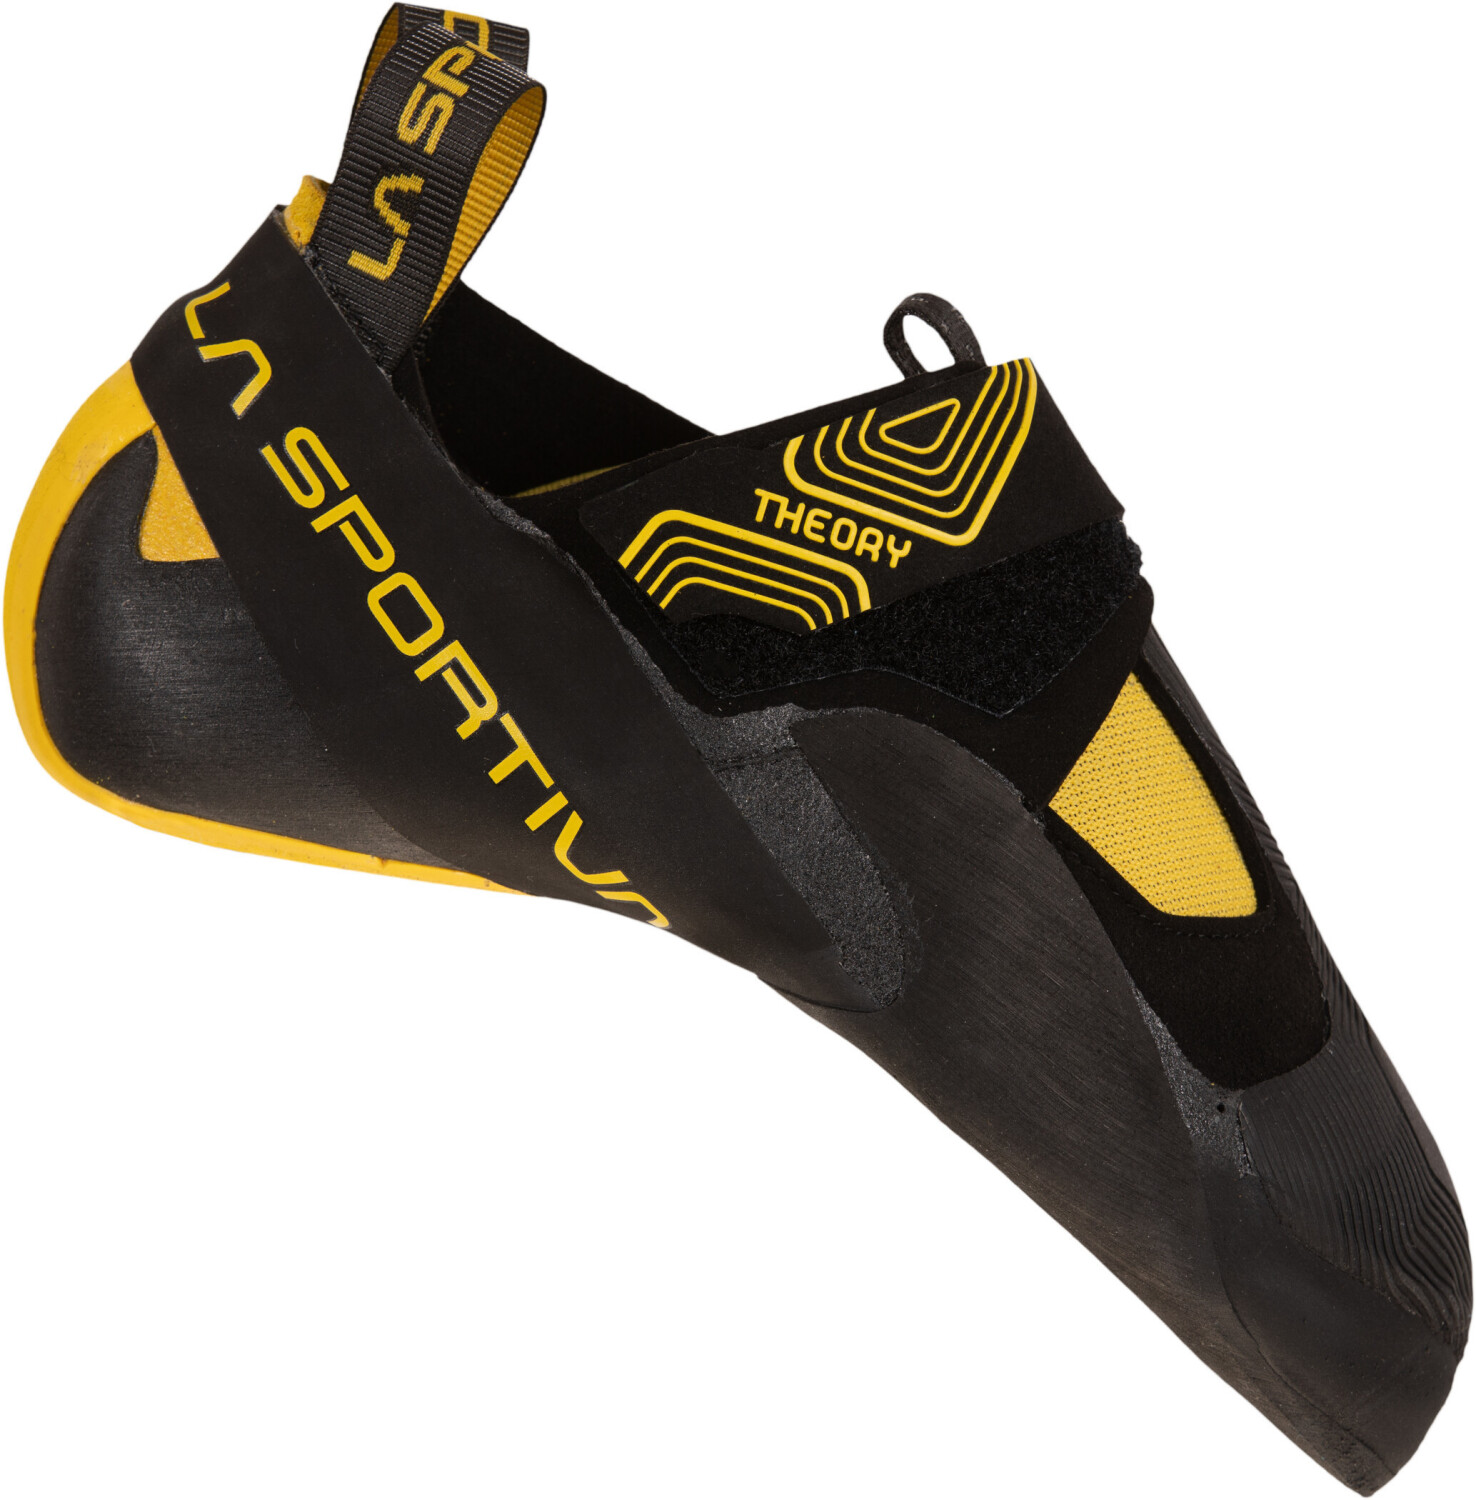 Buy La Sportiva Theory (Black / Yellow) from £105.99 (Today